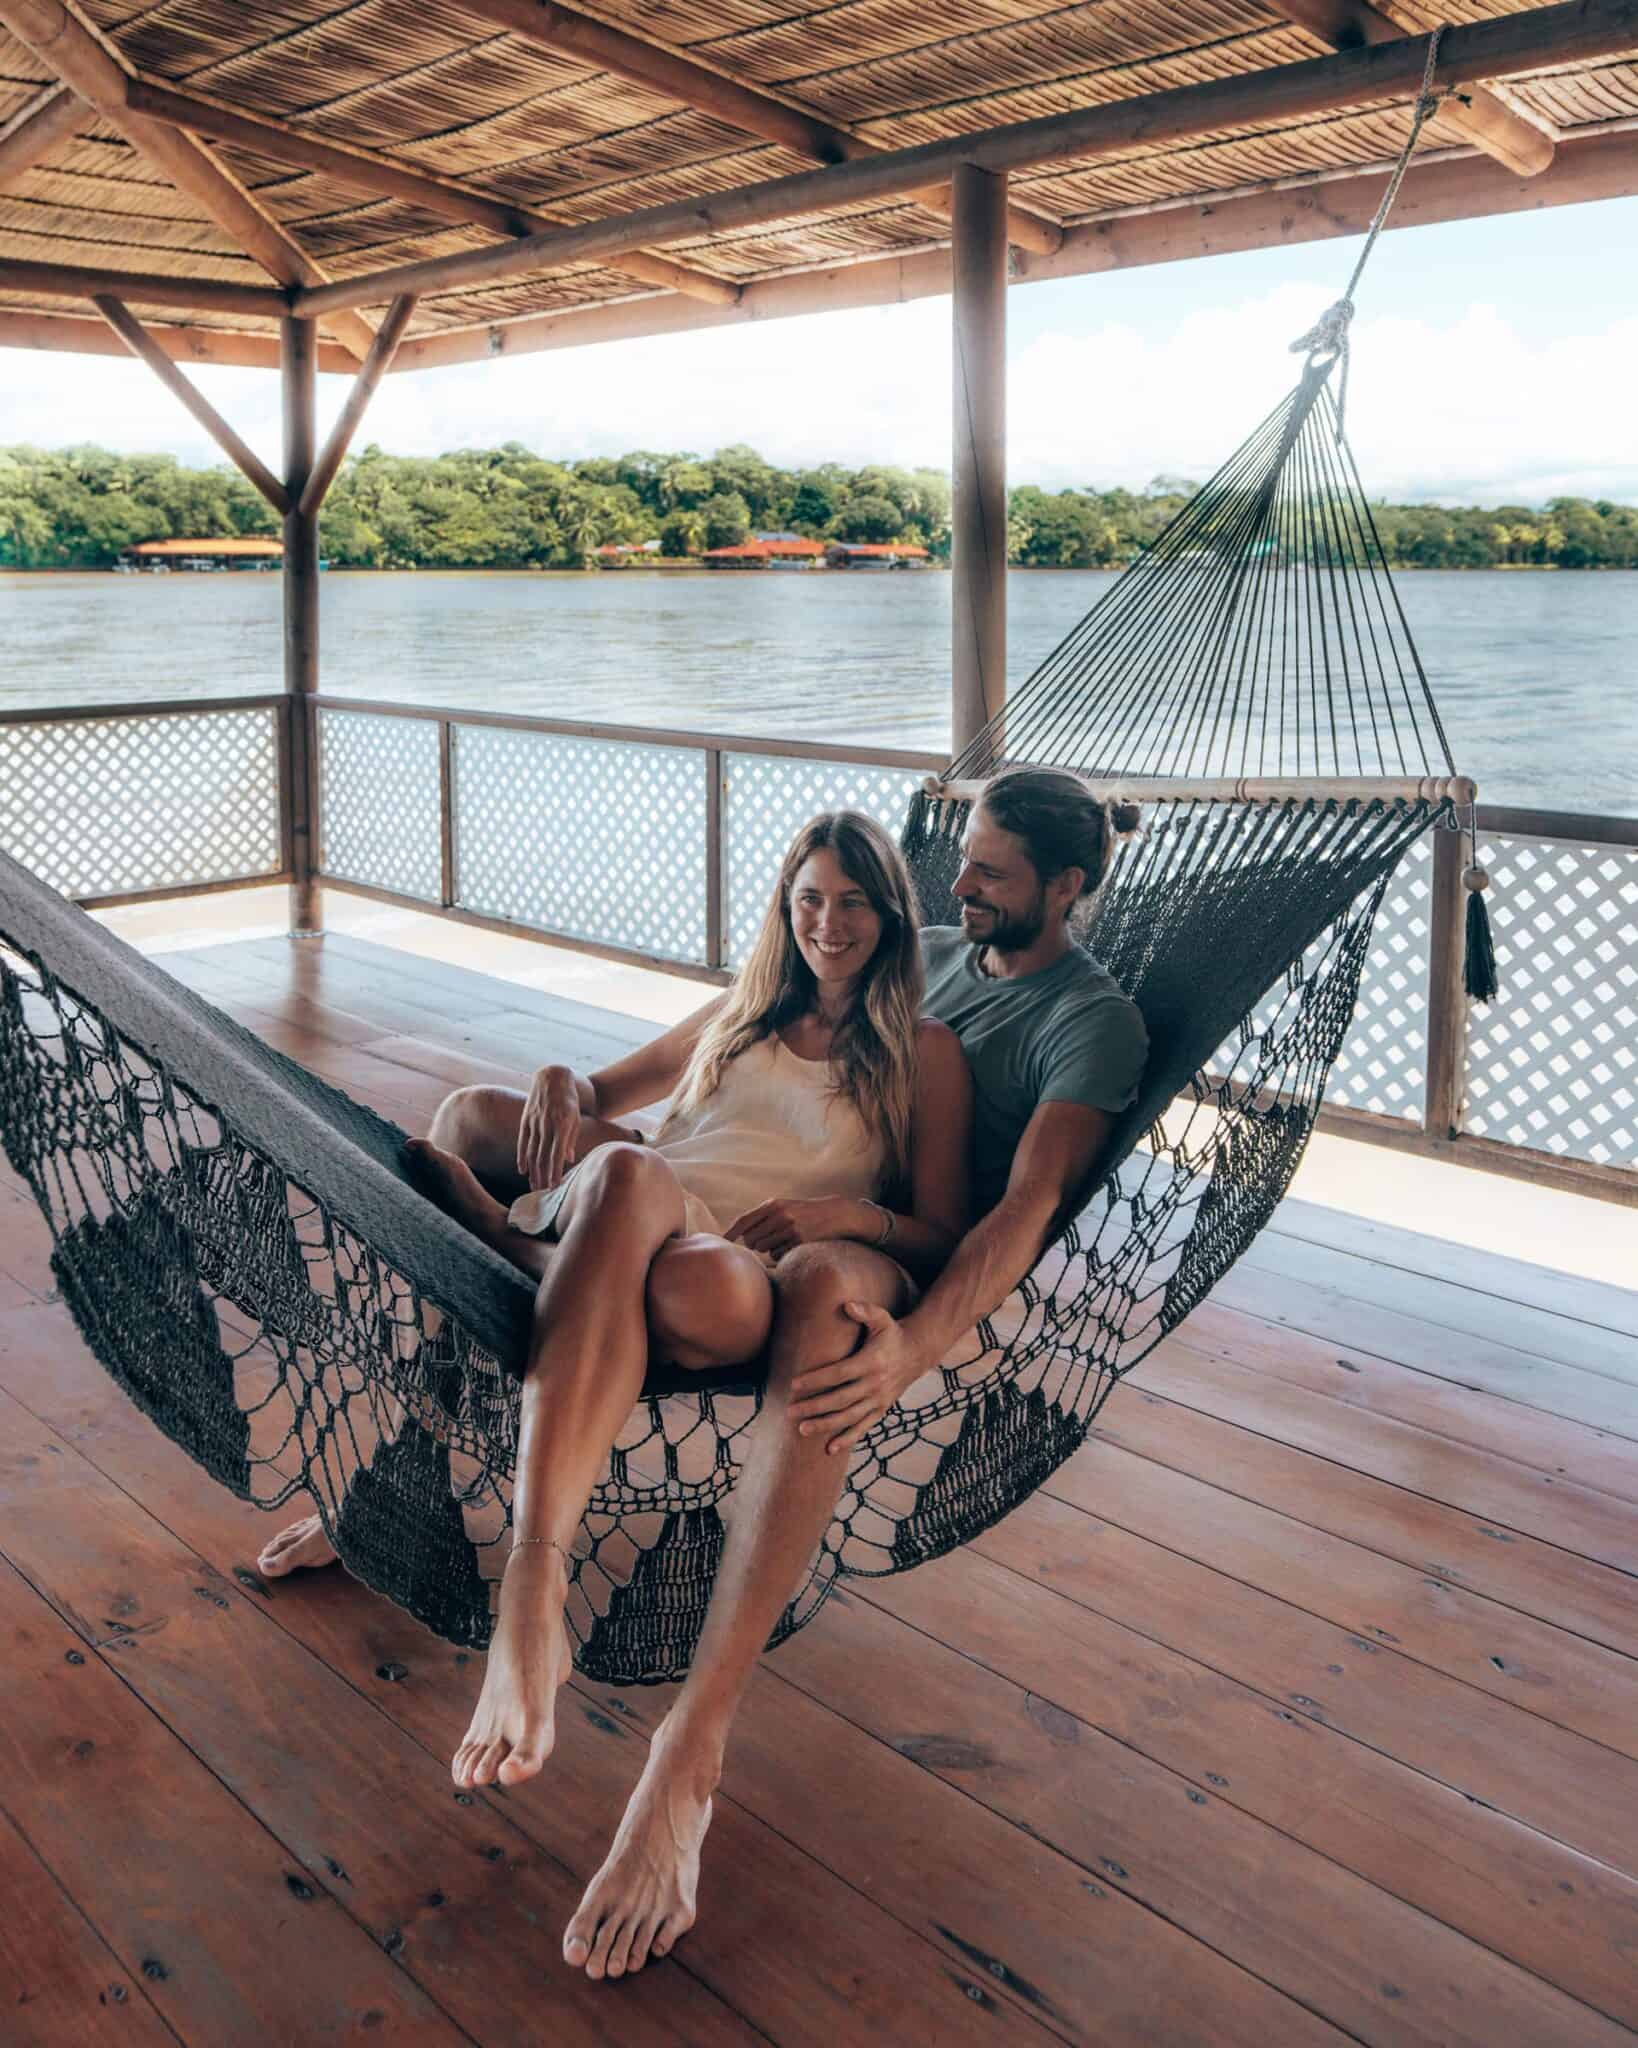 A couple relaxing in a hammock on a wooden deck in Tortuguero, Costa Rica.